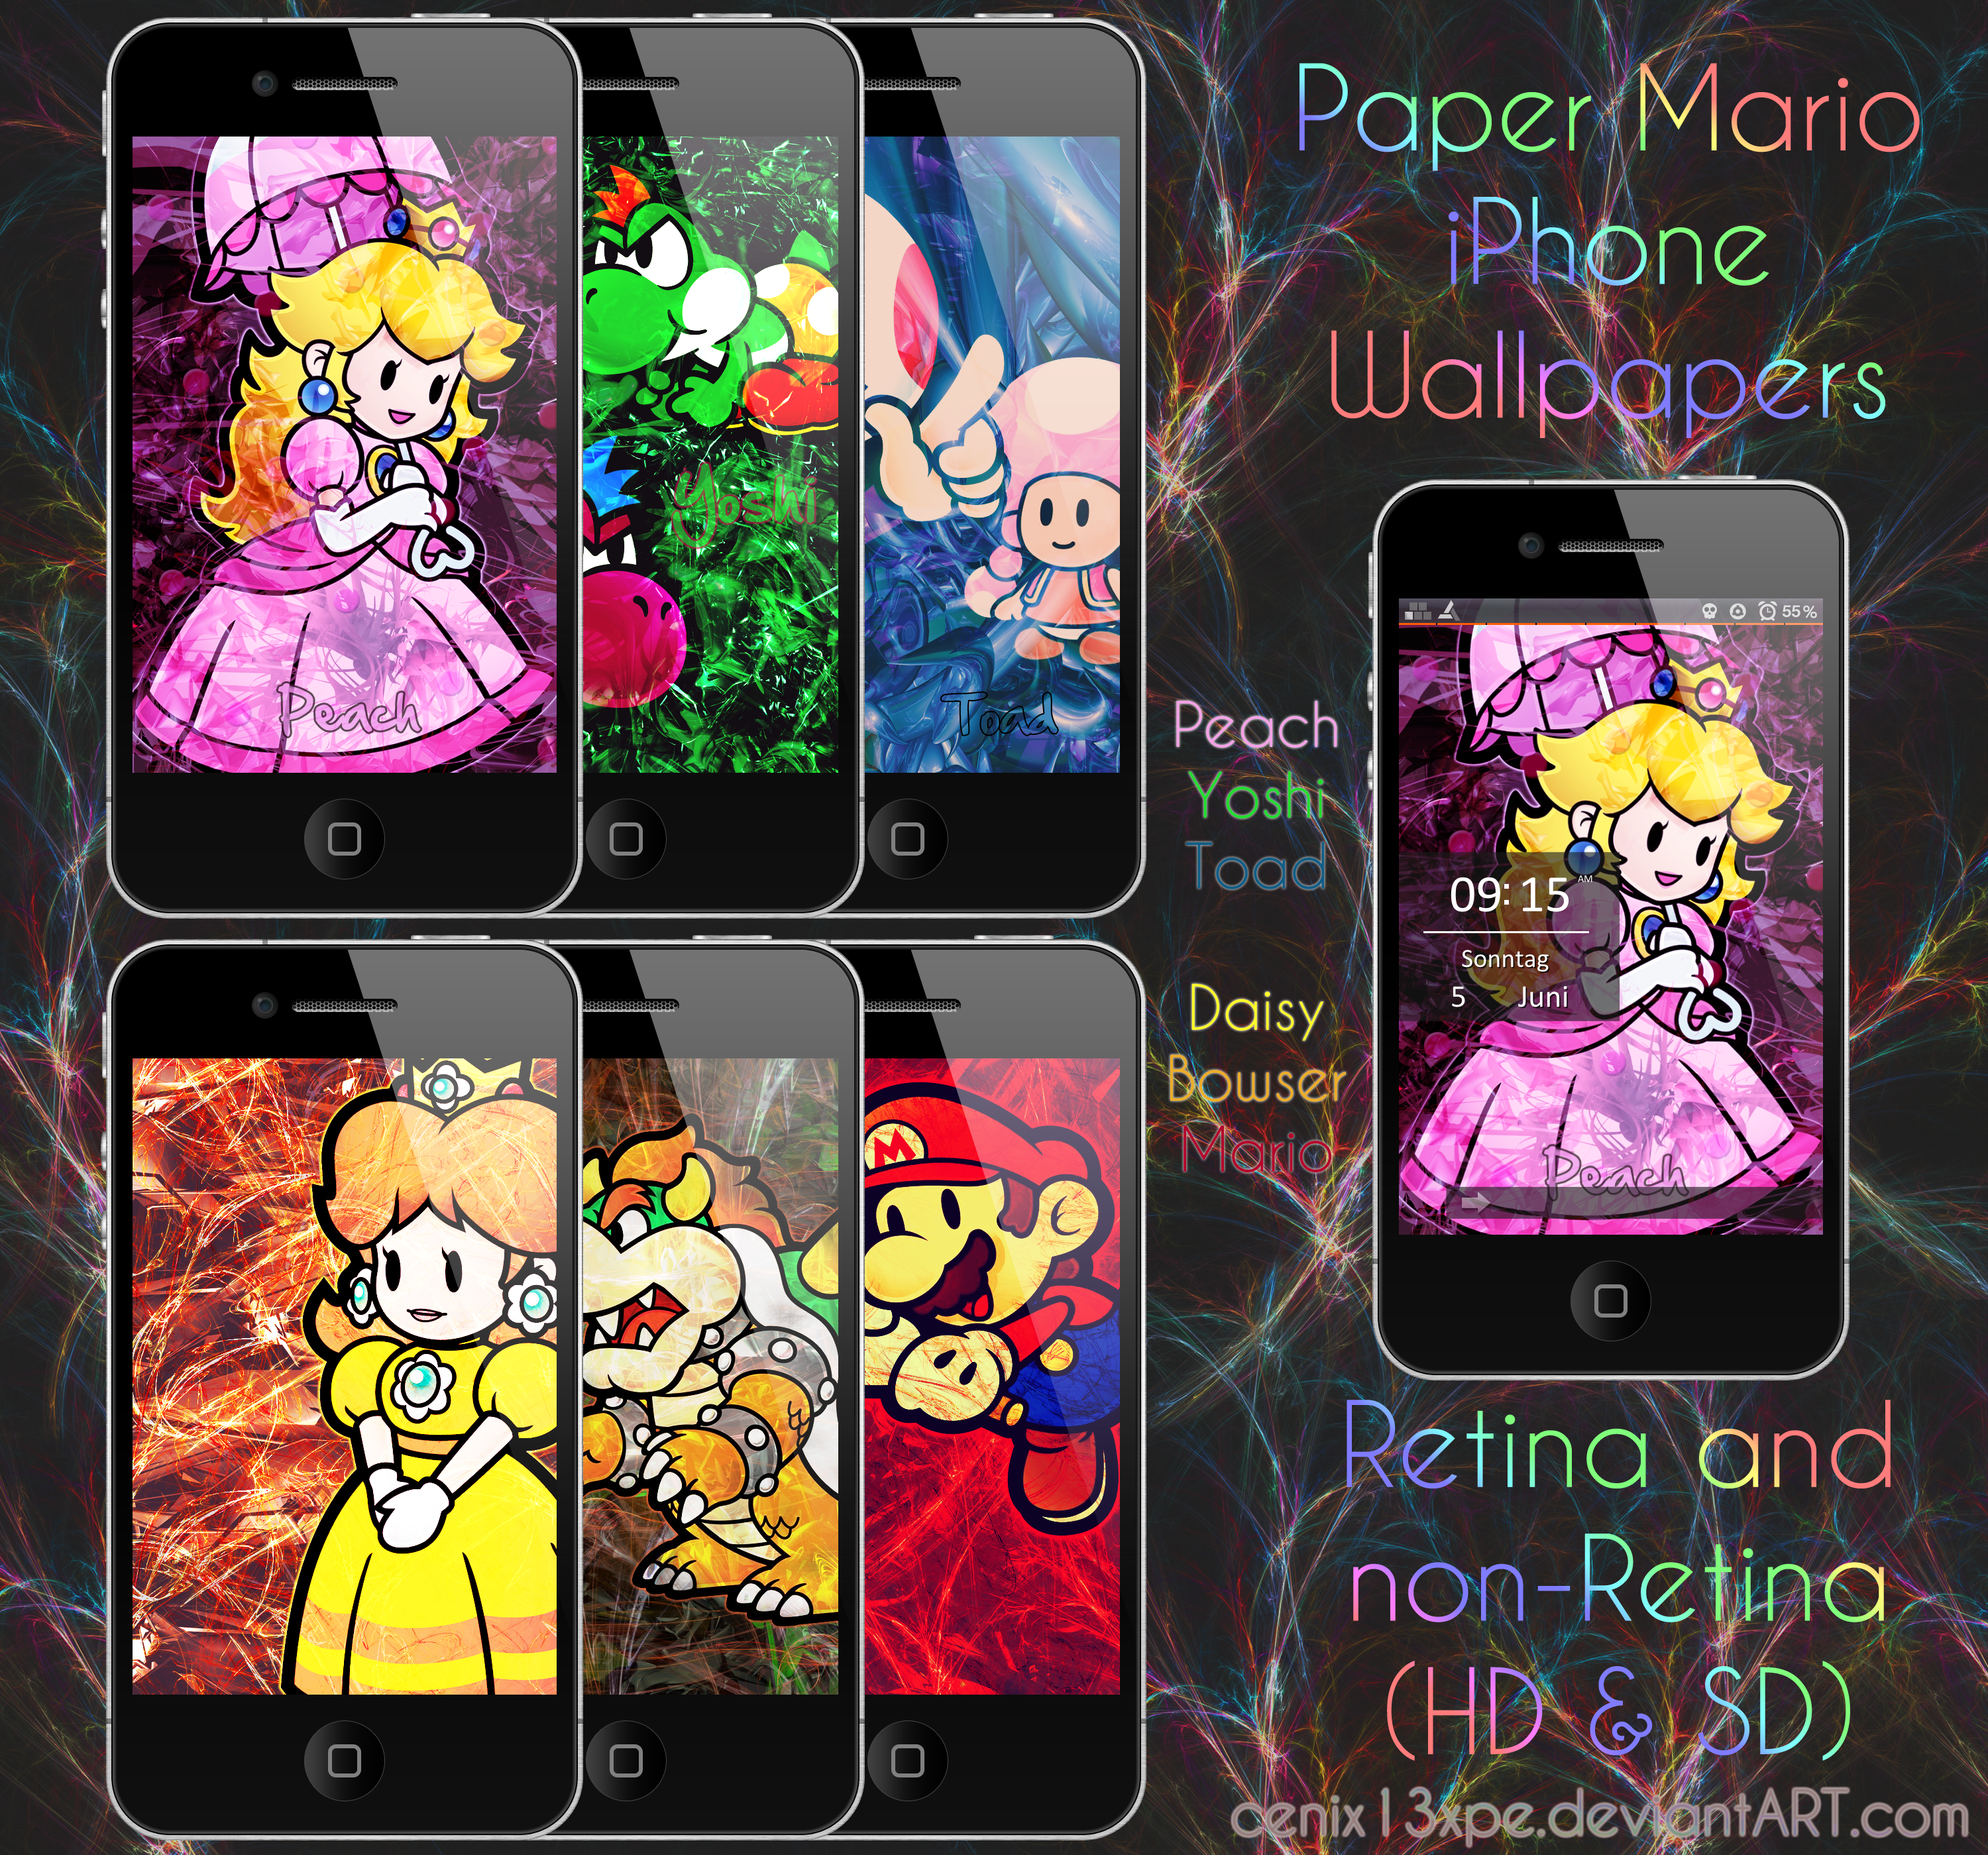 Paper Mario iPhone Wallpapers by Xeonhack on